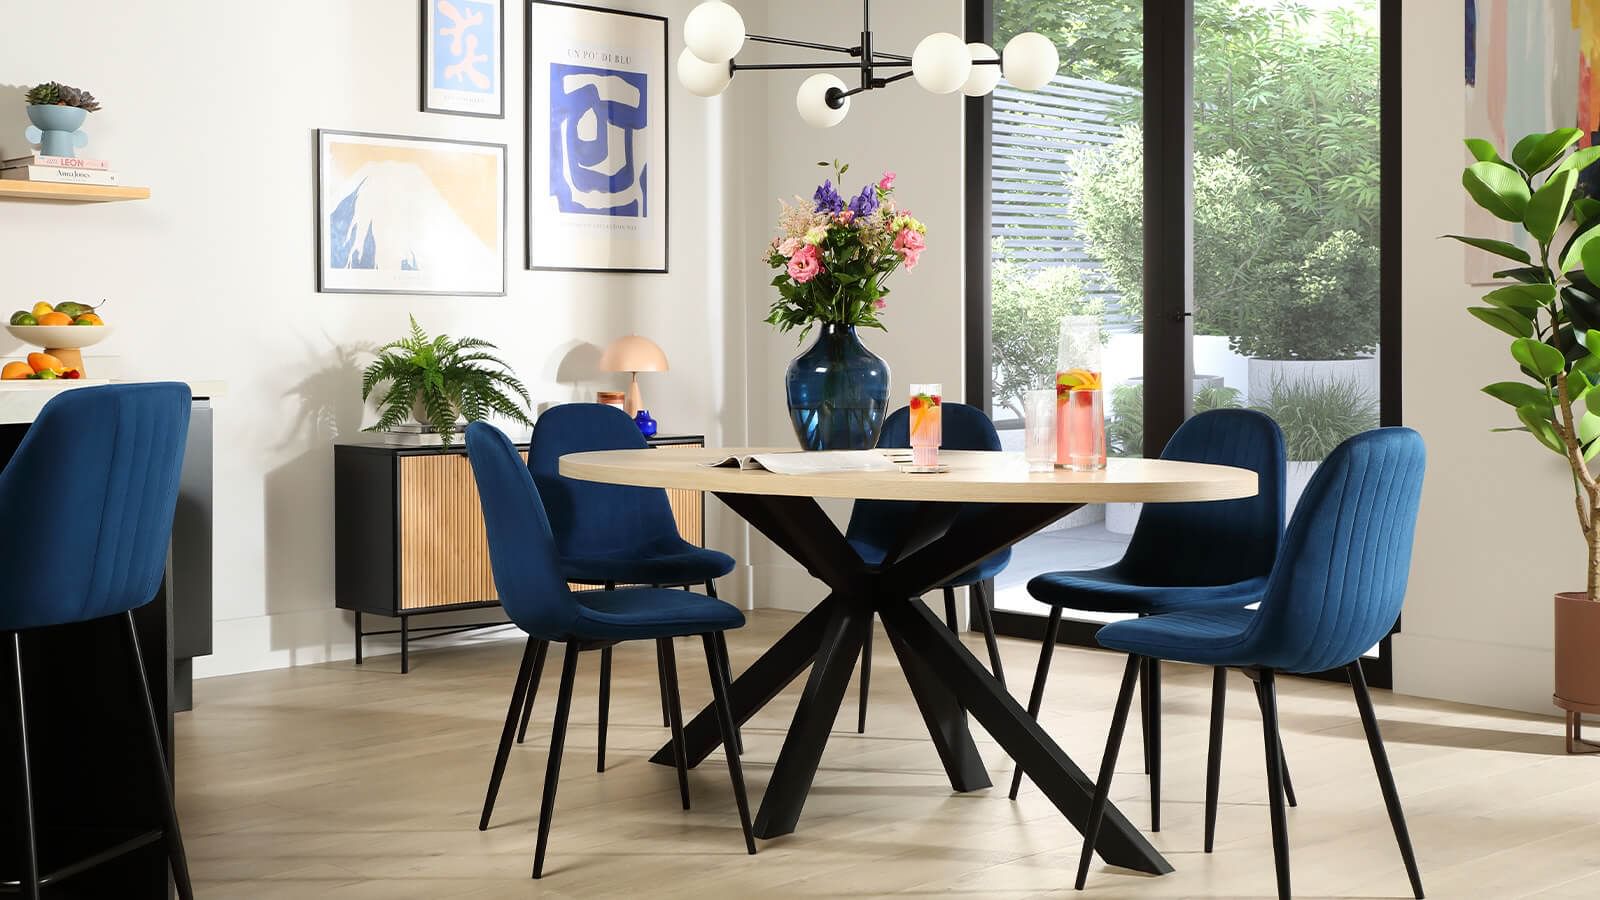 3 easy ways to refresh your dining space